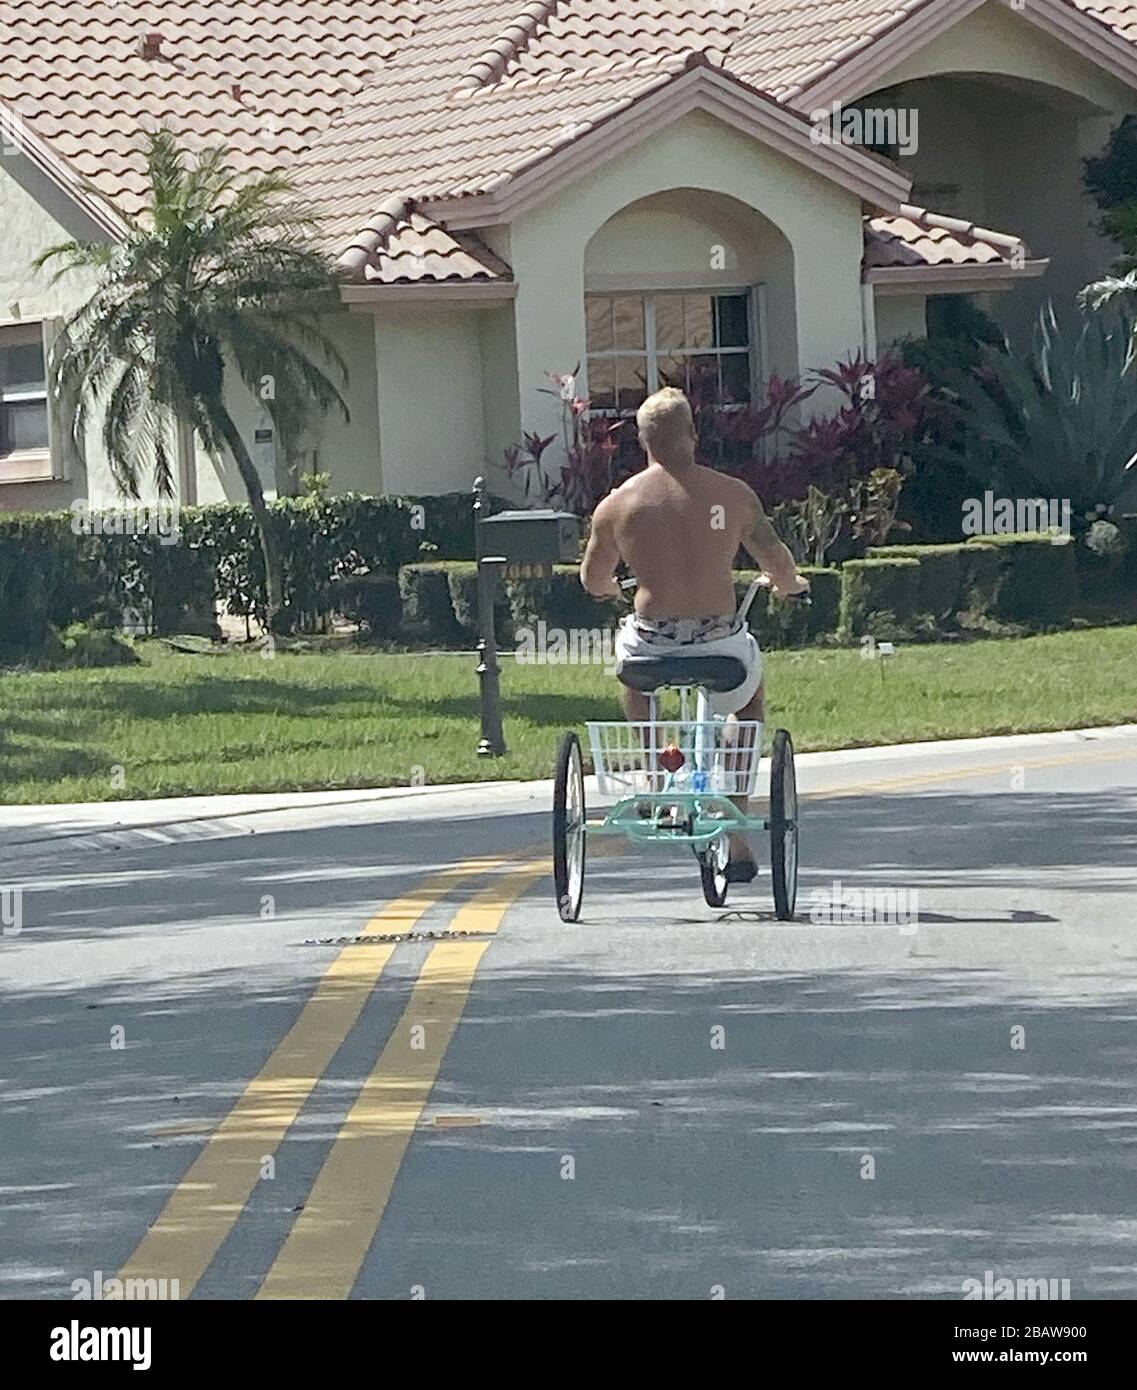 Boynton Beach, United States. 29th Mar, 2020. A resident goes out for a bike ride as temperatures go into the high 80's in Boynton Beach, Florida on Sunday, March 29, 2020. The Florida Surgeon General put out a public service alert on Saturday, March 28, 2020 that all residents 65  or have medical conditions should stay at home no matter what their age.Spending time with family at home and keeping a social distance from friends will help in the fight against the Coronavirus outbreak. Photo by Gary I Rothstein/UPI Credit: UPI/Alamy Live News Stock Photo